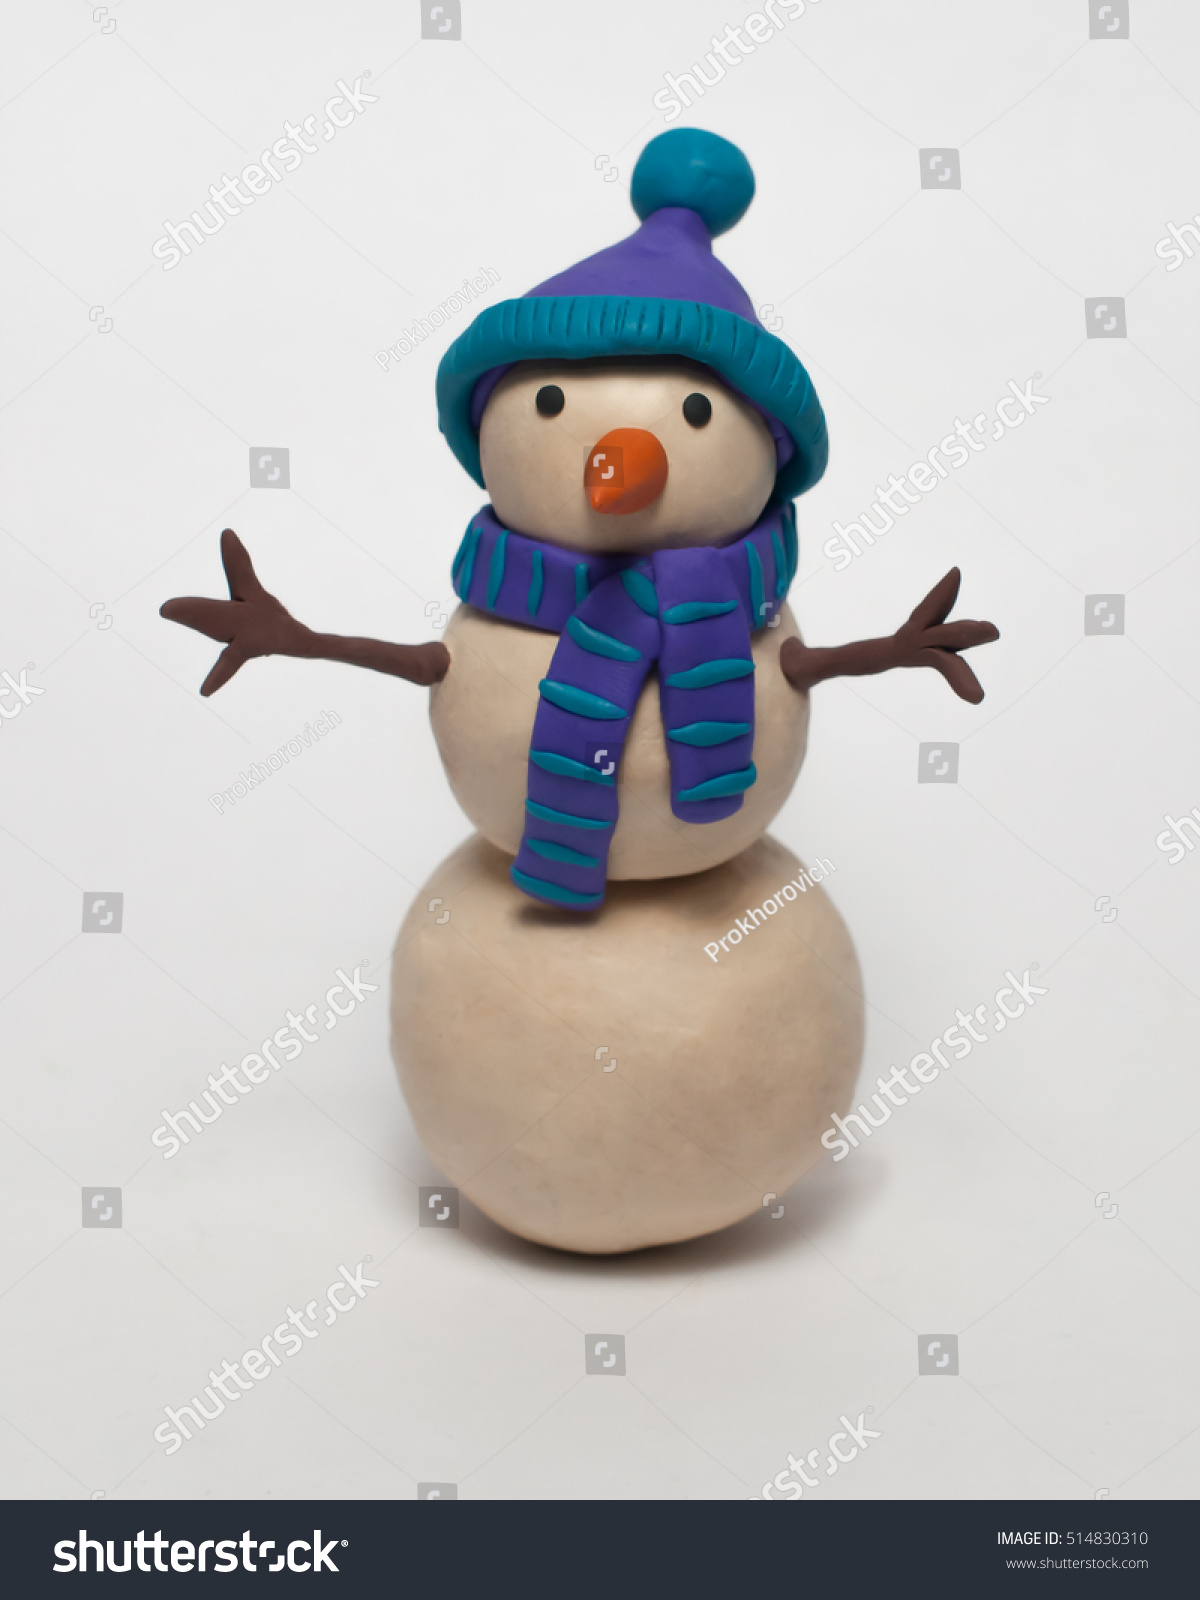 
Funny plasticine snowman in a blue hat and scarf isolated on white background #514830310